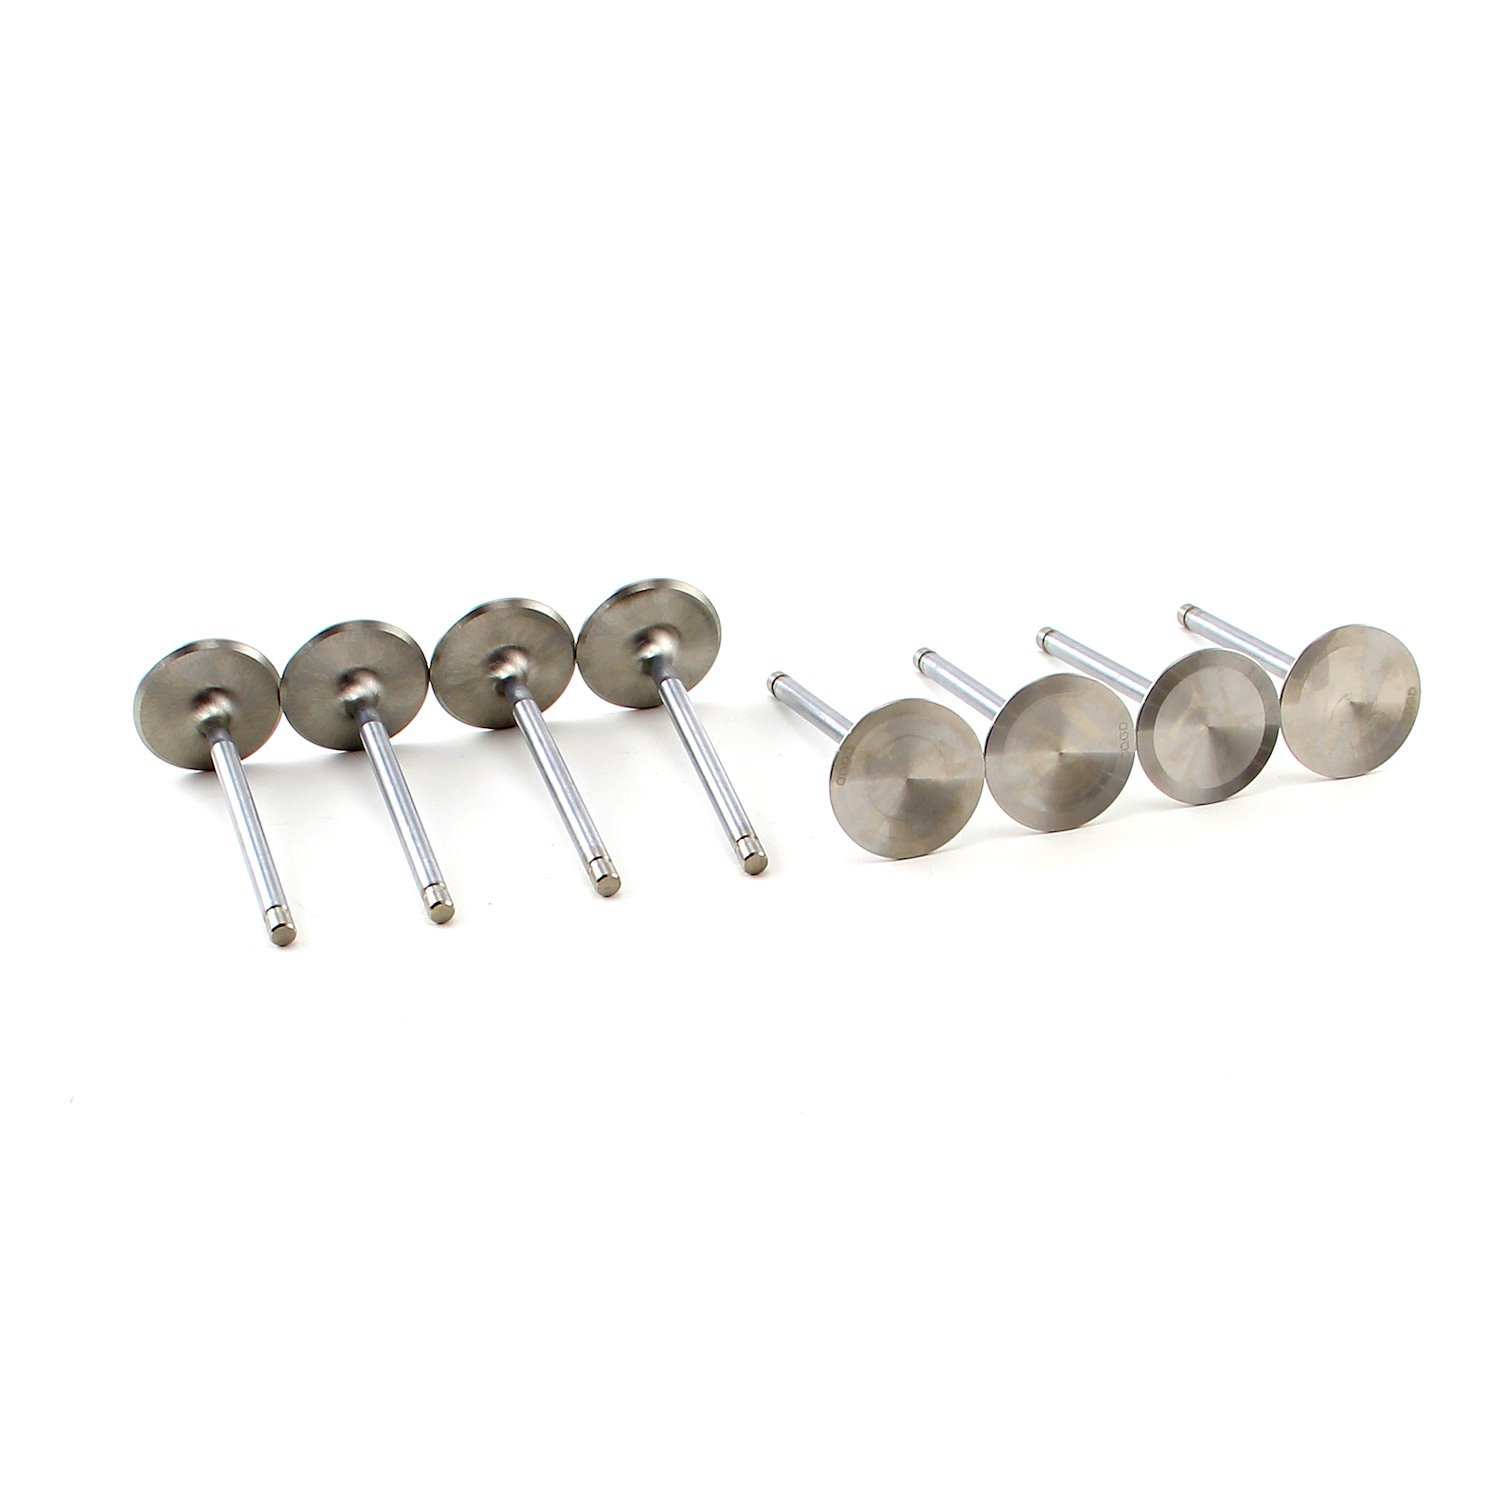 Stainless Steel Intake Valves Small Block Chevy 350